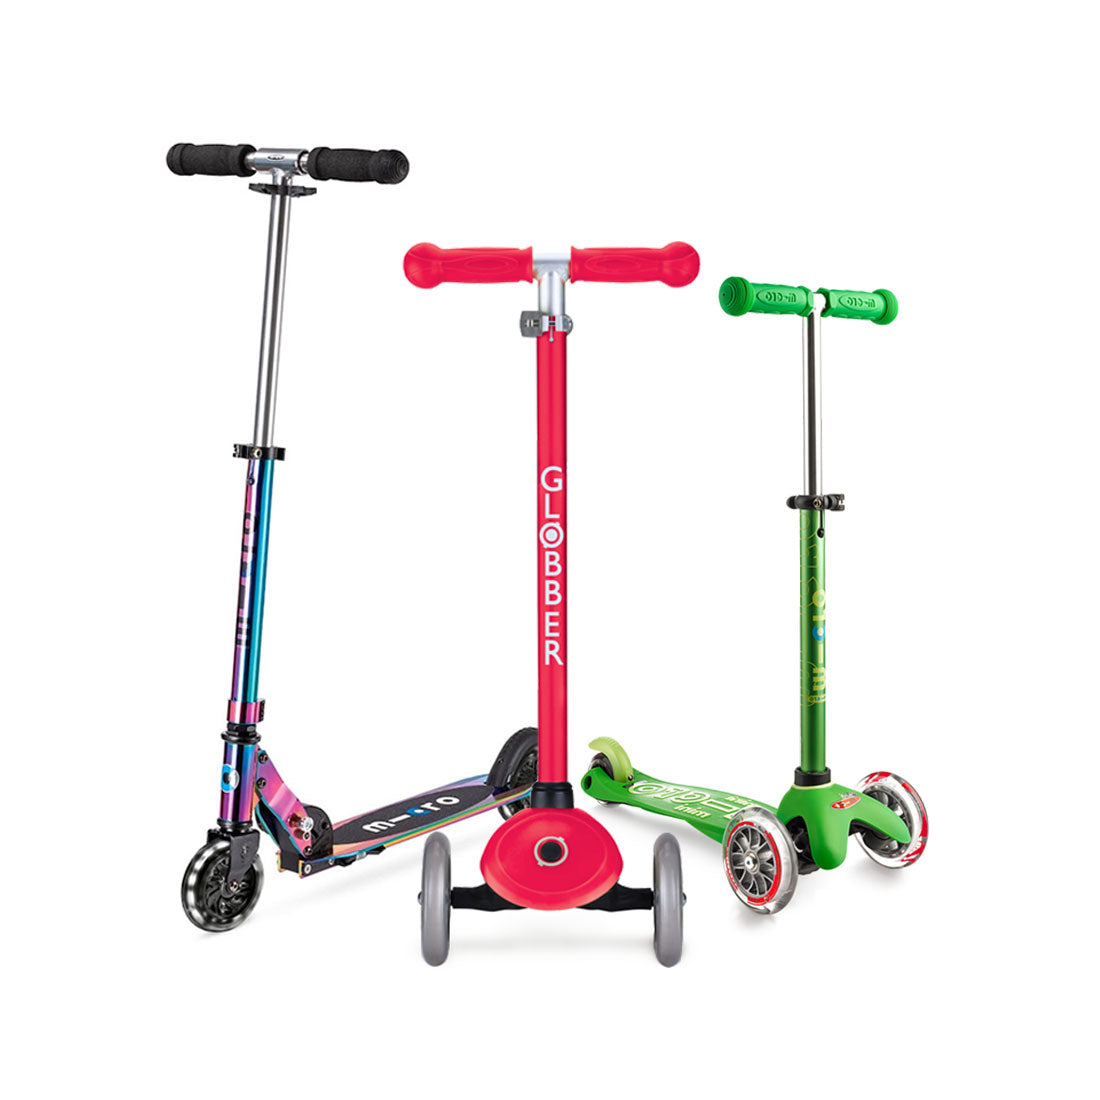  Envy Scooters Grip Tape - COLT Red : Sports & Outdoors